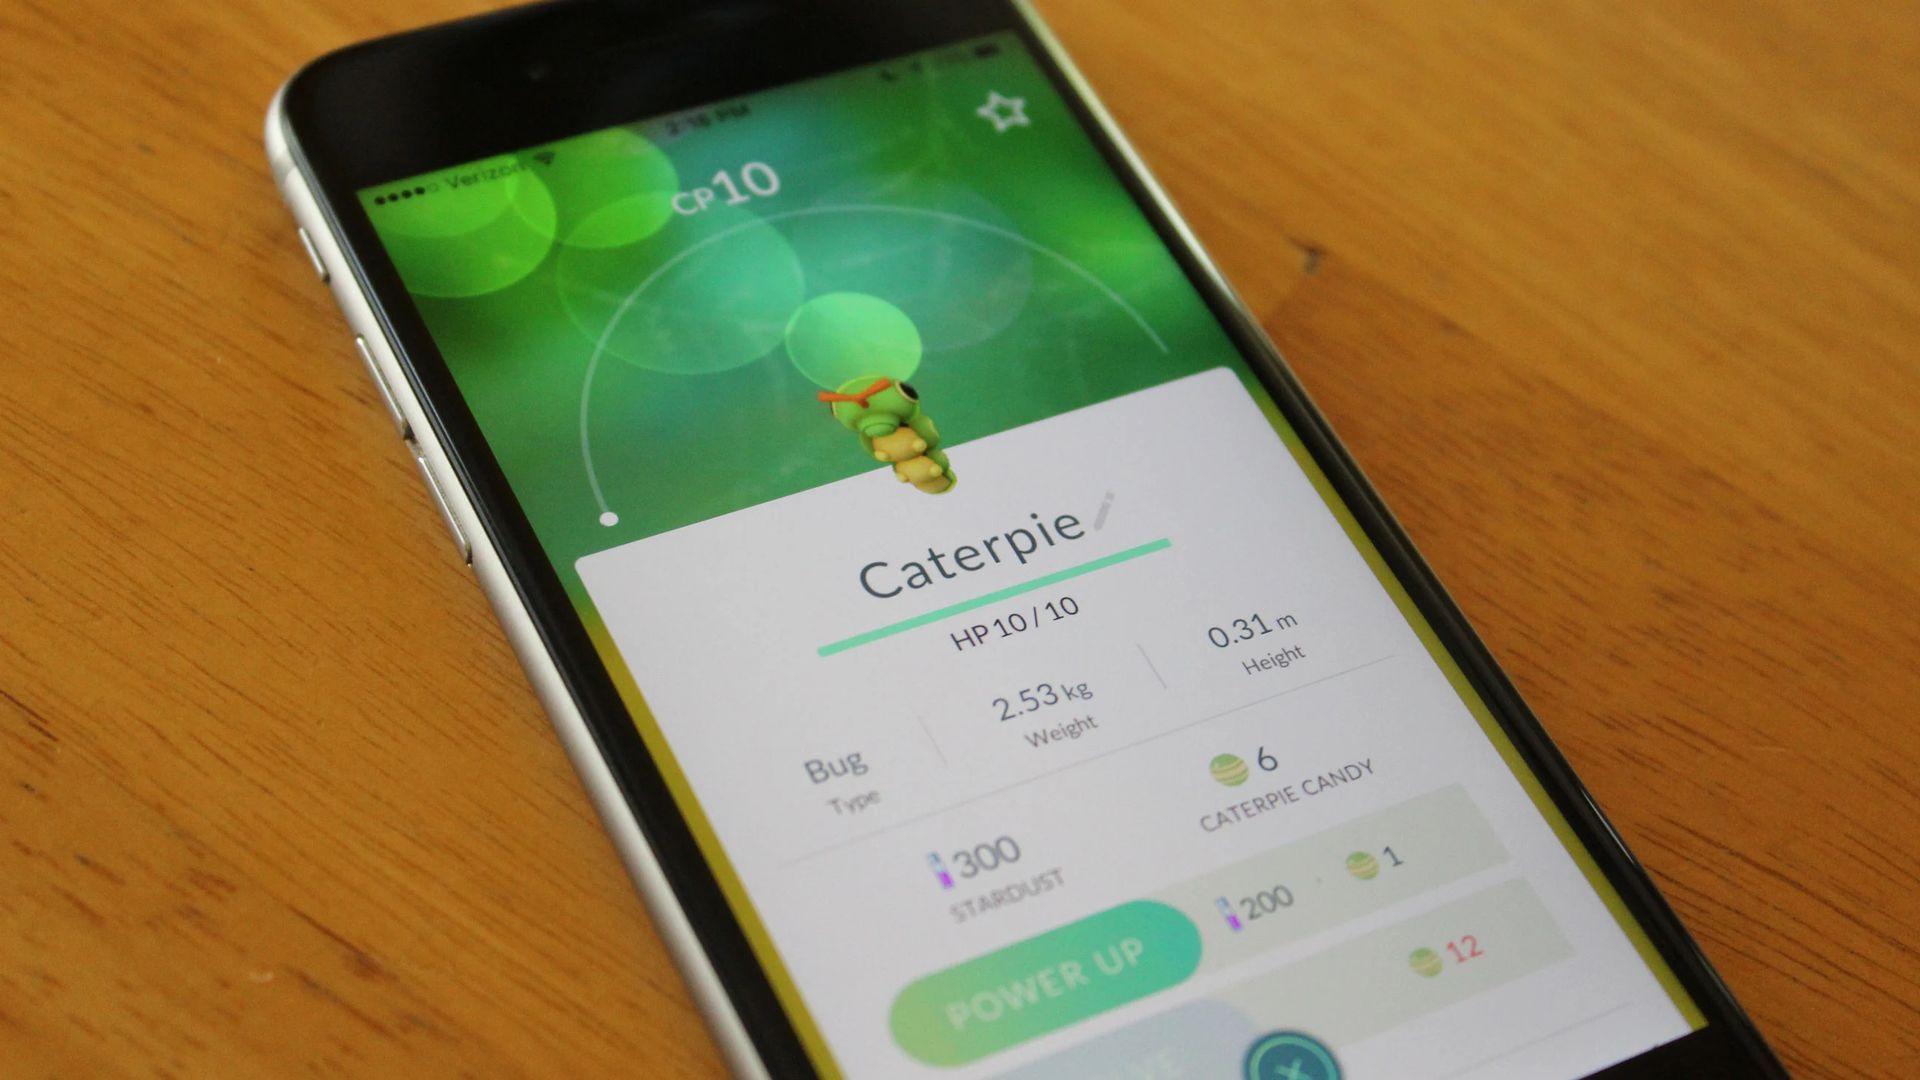 Today, we'll be taking a look at how you can fix Pokemon GO Adventure Sync not working on both iOS and Android, so you can keep playing the game.